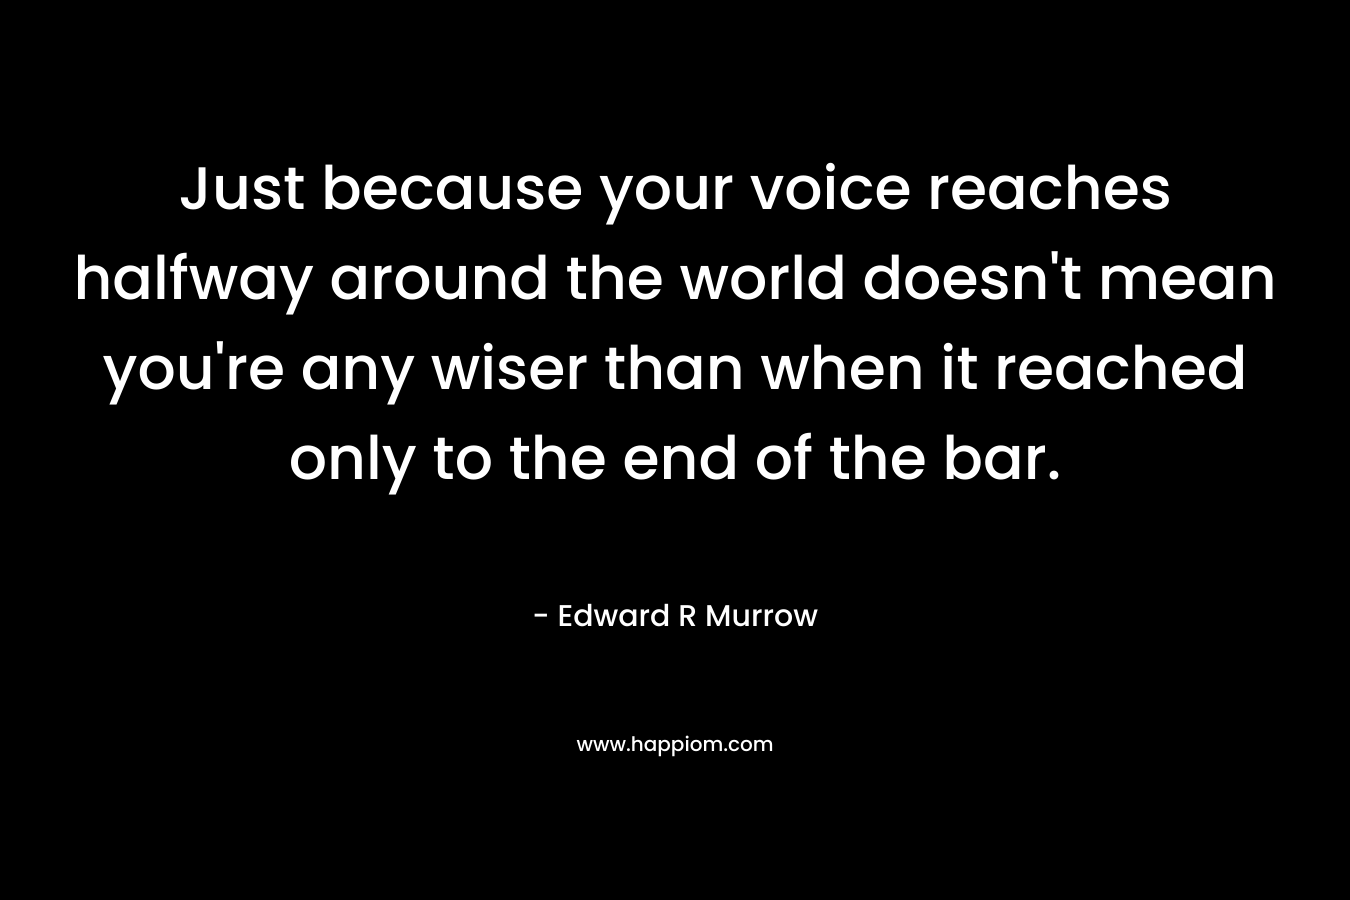 Just because your voice reaches halfway around the world doesn’t mean you’re any wiser than when it reached only to the end of the bar. – Edward R Murrow